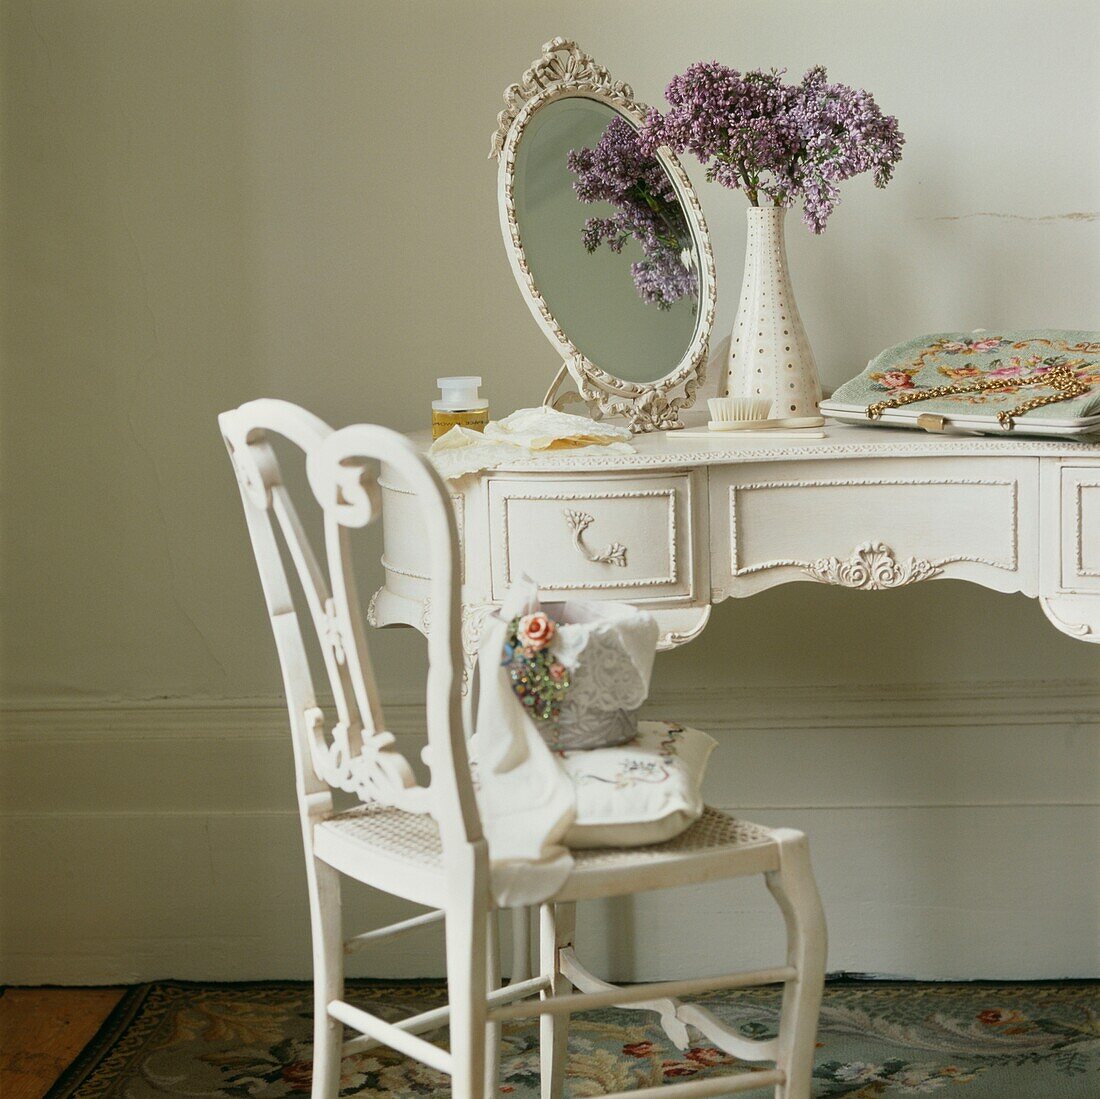 Vase of flowers with oval shaped mirror on dressing table with chair and handbag